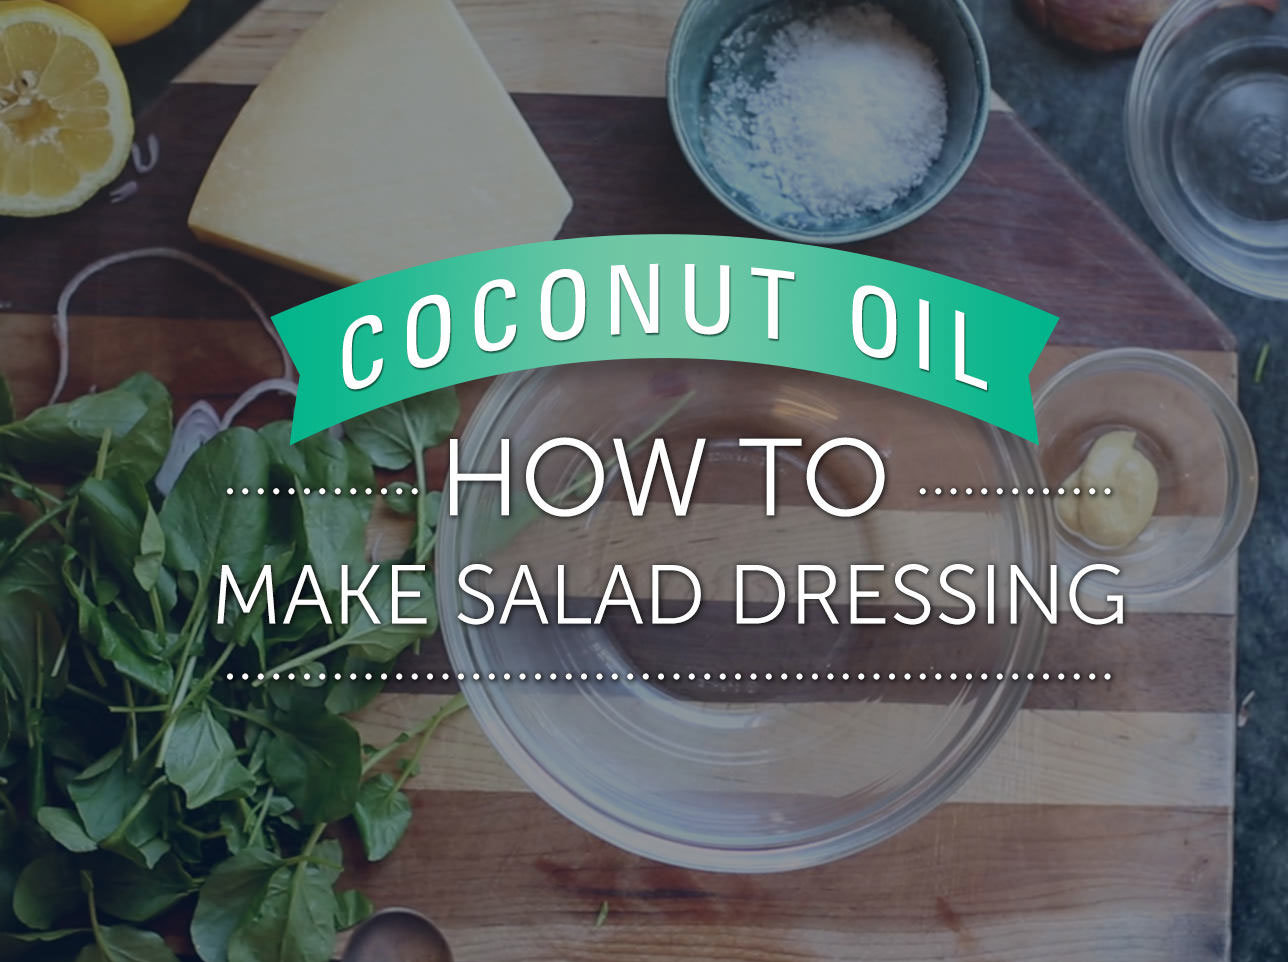 Learn how to make salad dressing with LouAna Coconut Oil.